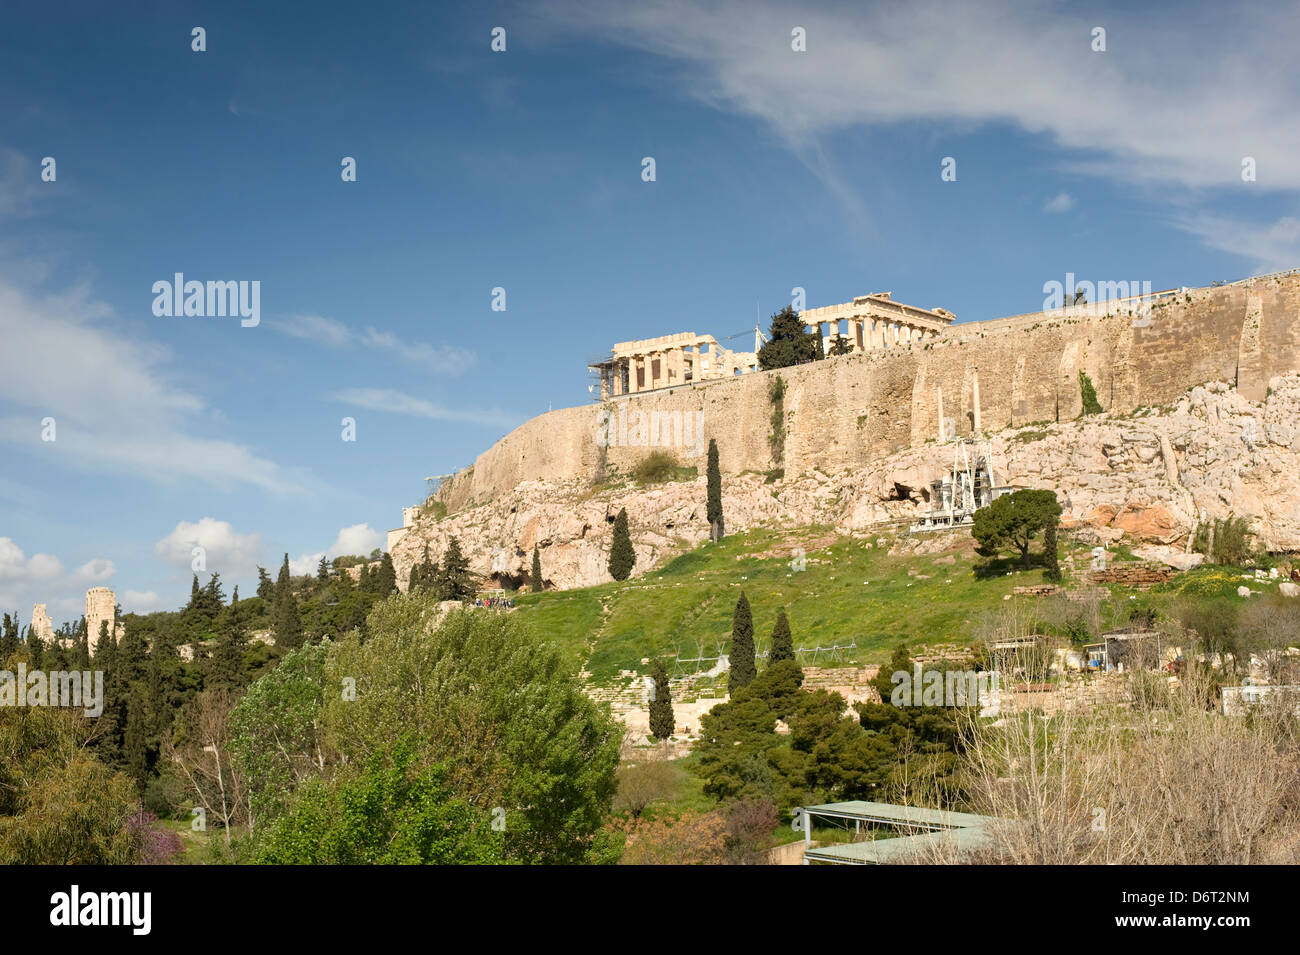 Athens, Greece, March 24, 2013: The Acropolis in Athens, Greece. Stock Photo